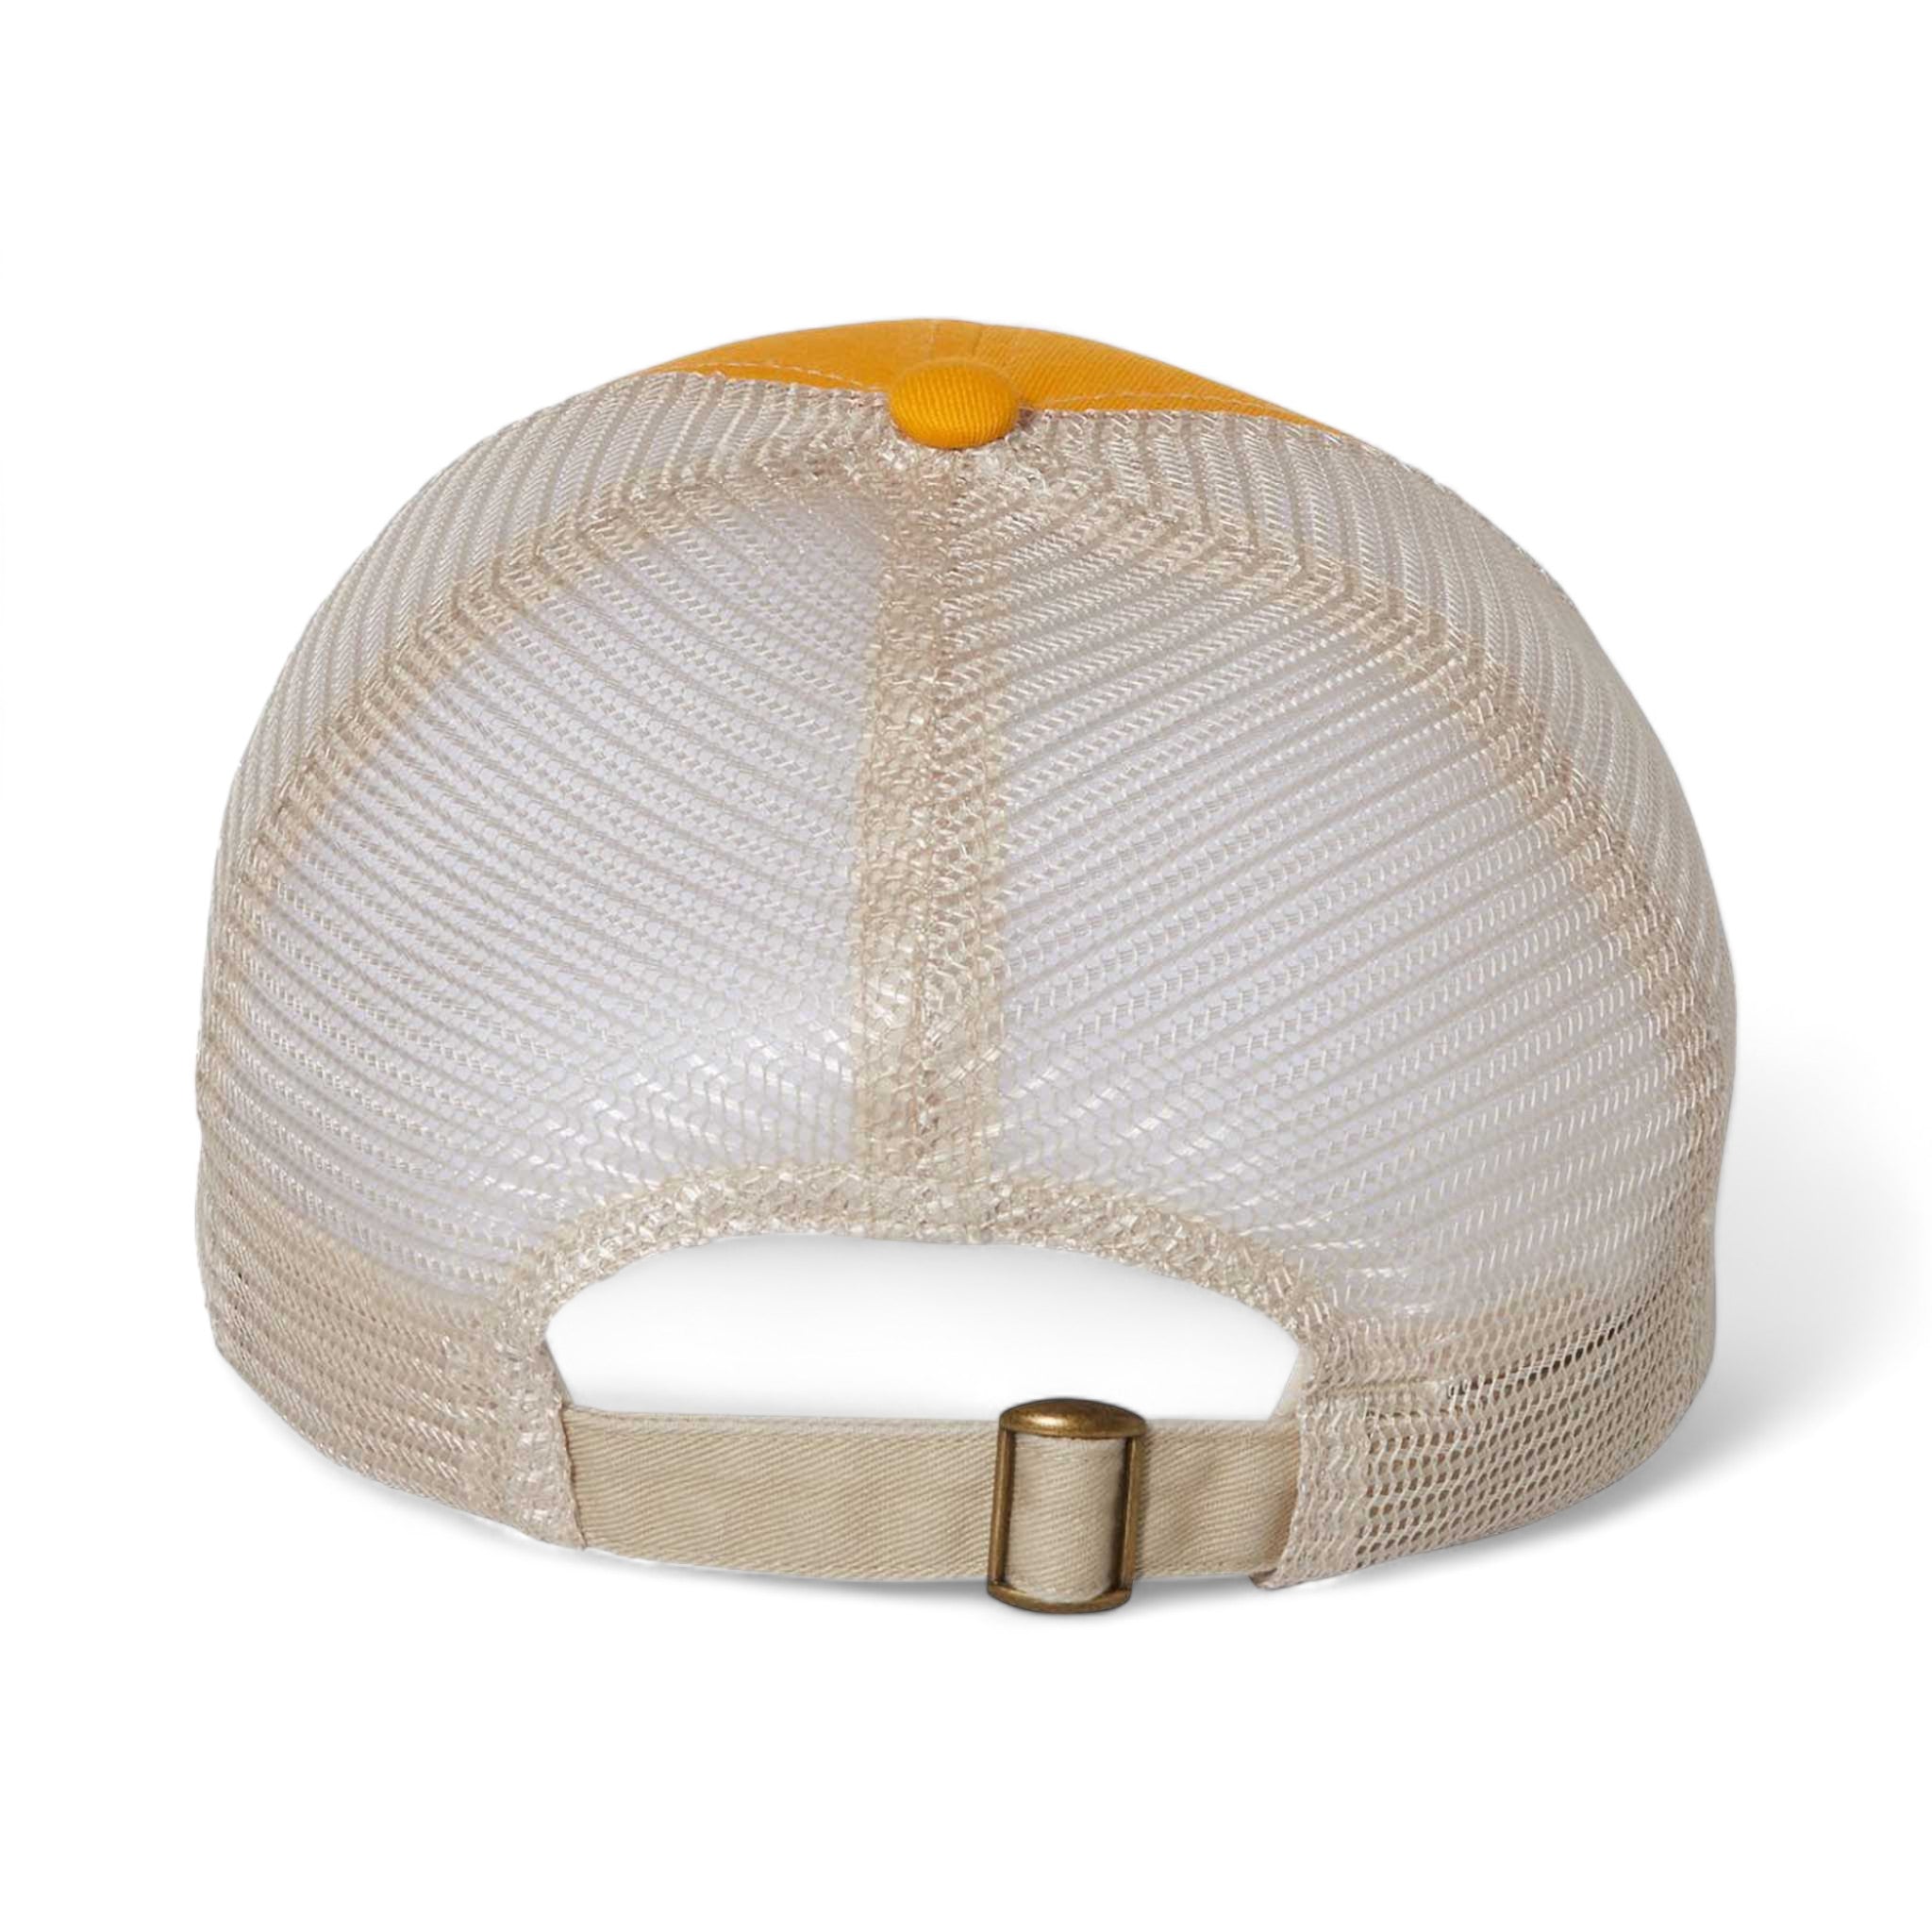 Back view of Sportsman 3100 custom hat in gold and stone